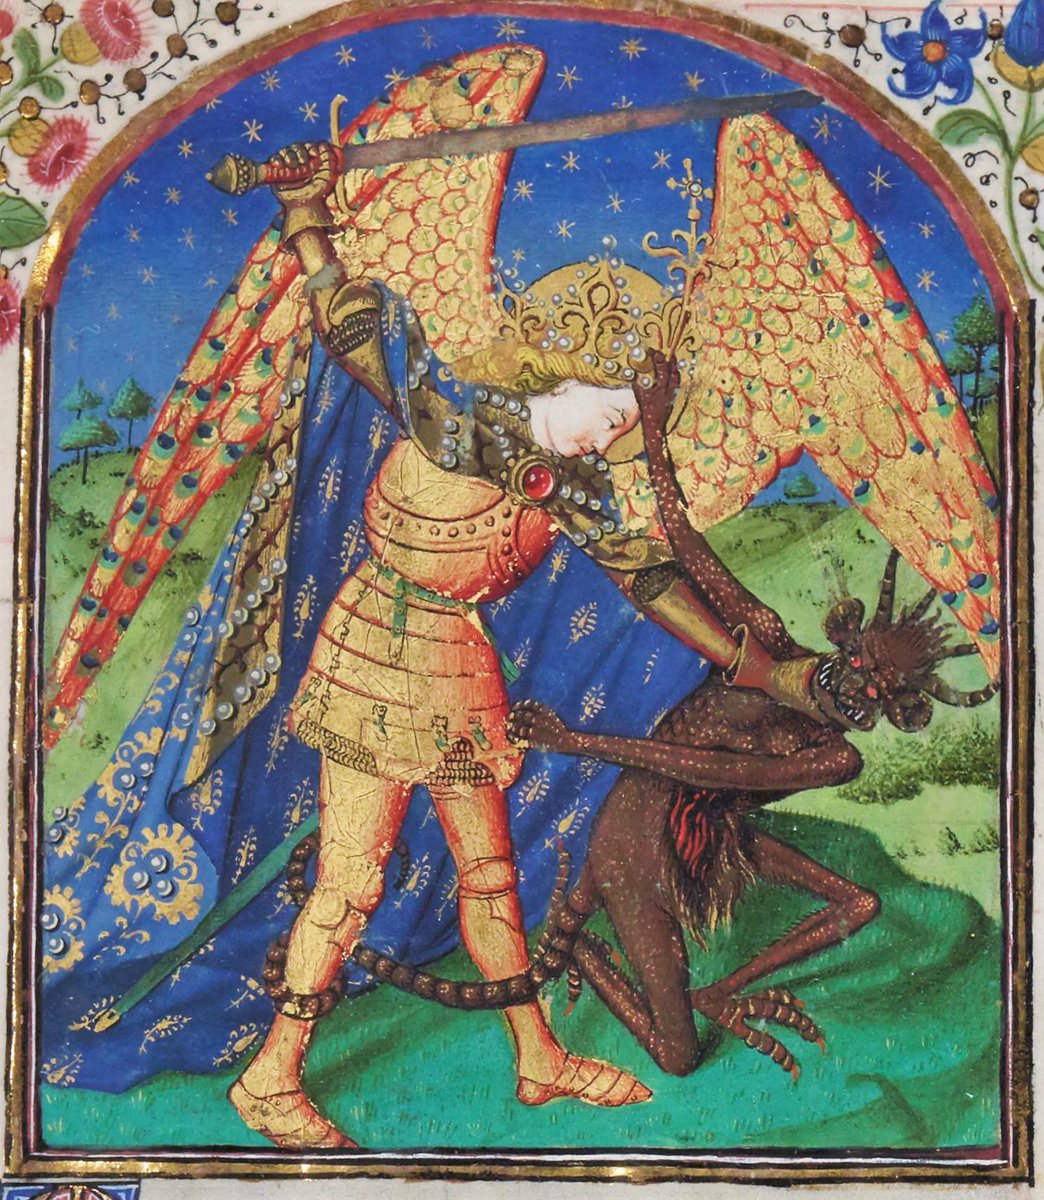 Saint Michael Overcoming the Dragon, from the Hours of Louis of Savoy c. 1445-1460